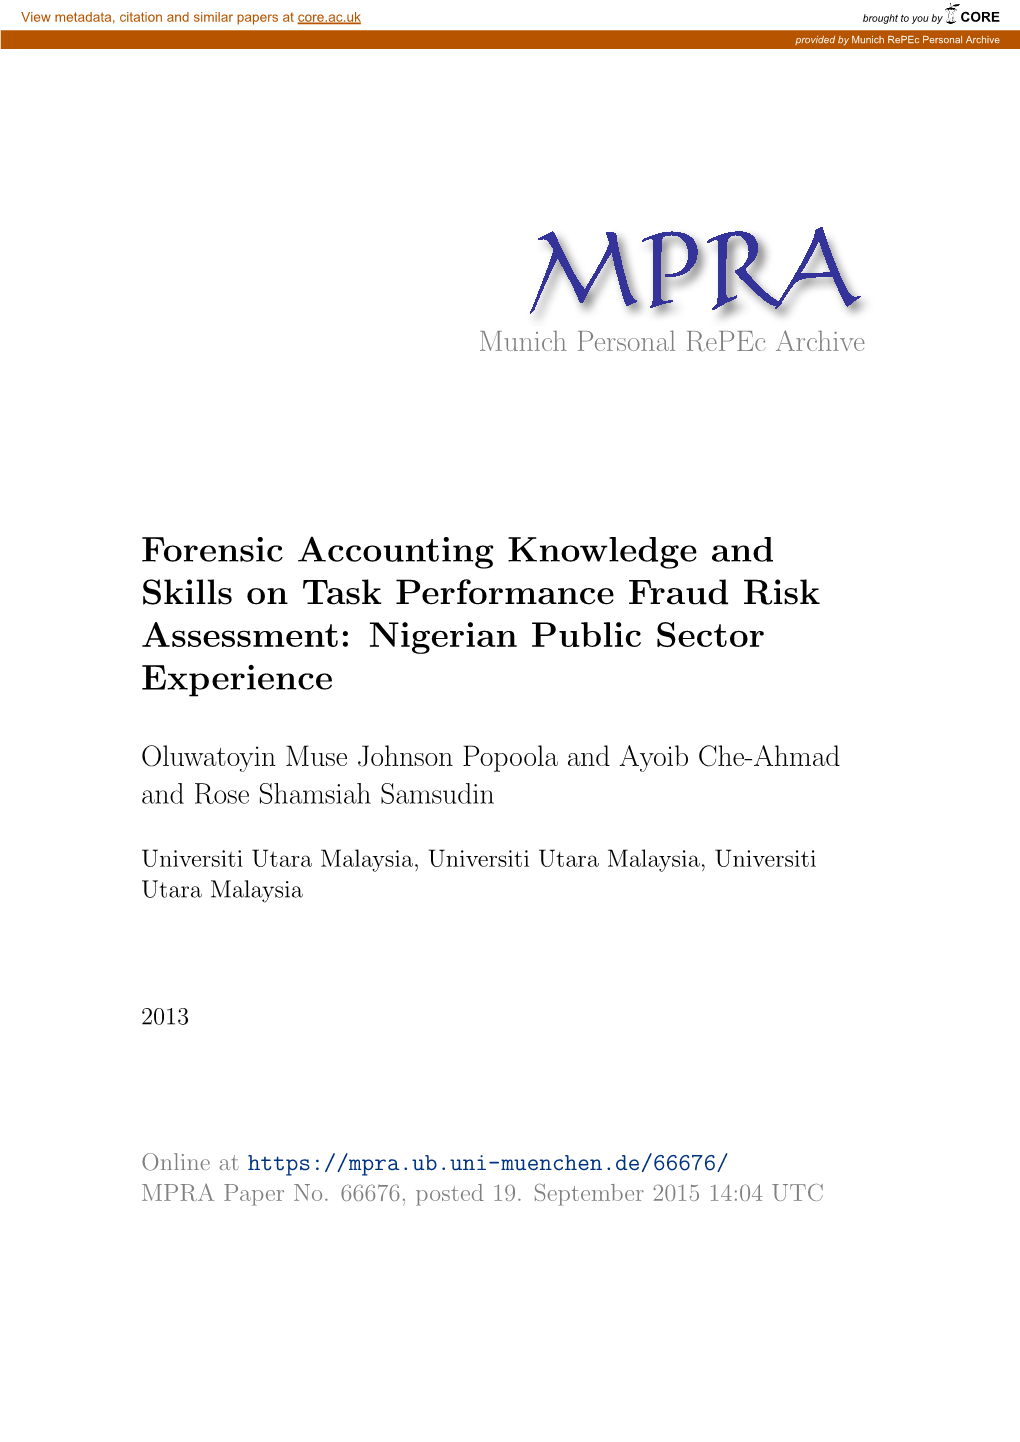 Forensic Accounting Knowledge and Skills on Task Performance Fraud Risk Assessment: Nigerian Public Sector Experience